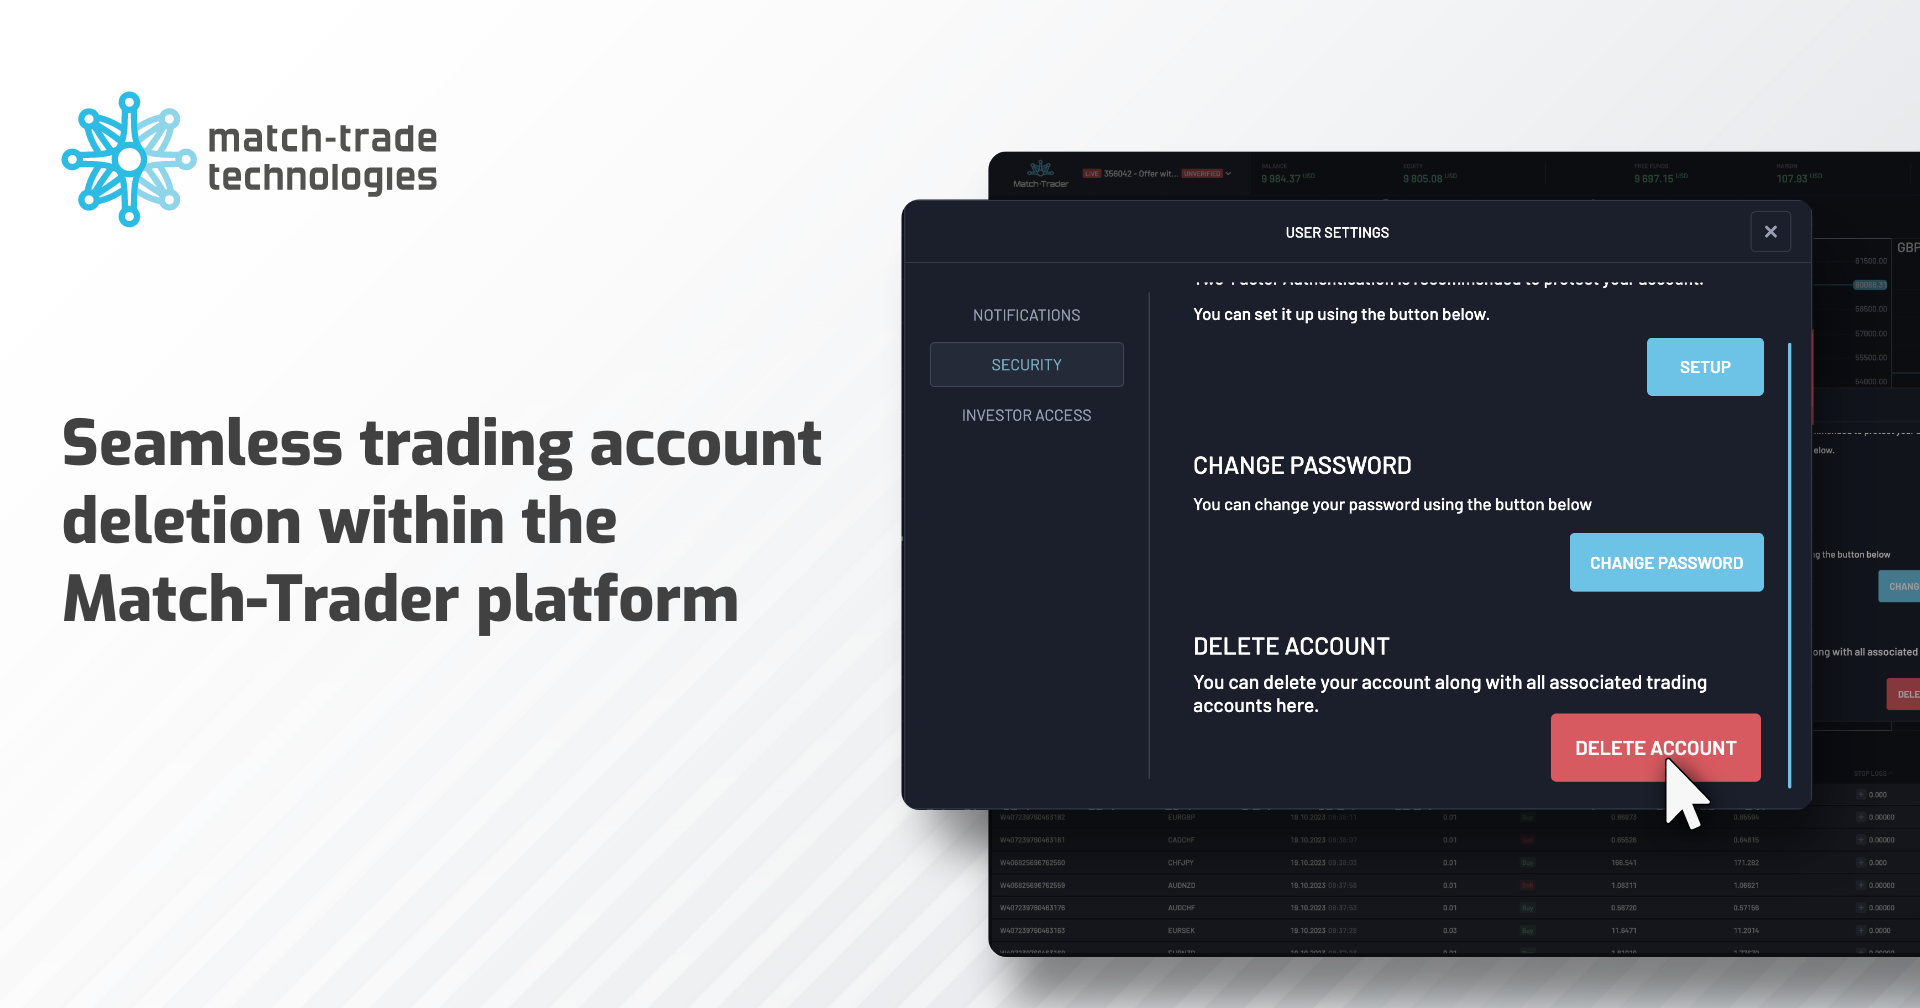 Match-Trade February release: Seamless trading account deletion within the Match-Trader platform